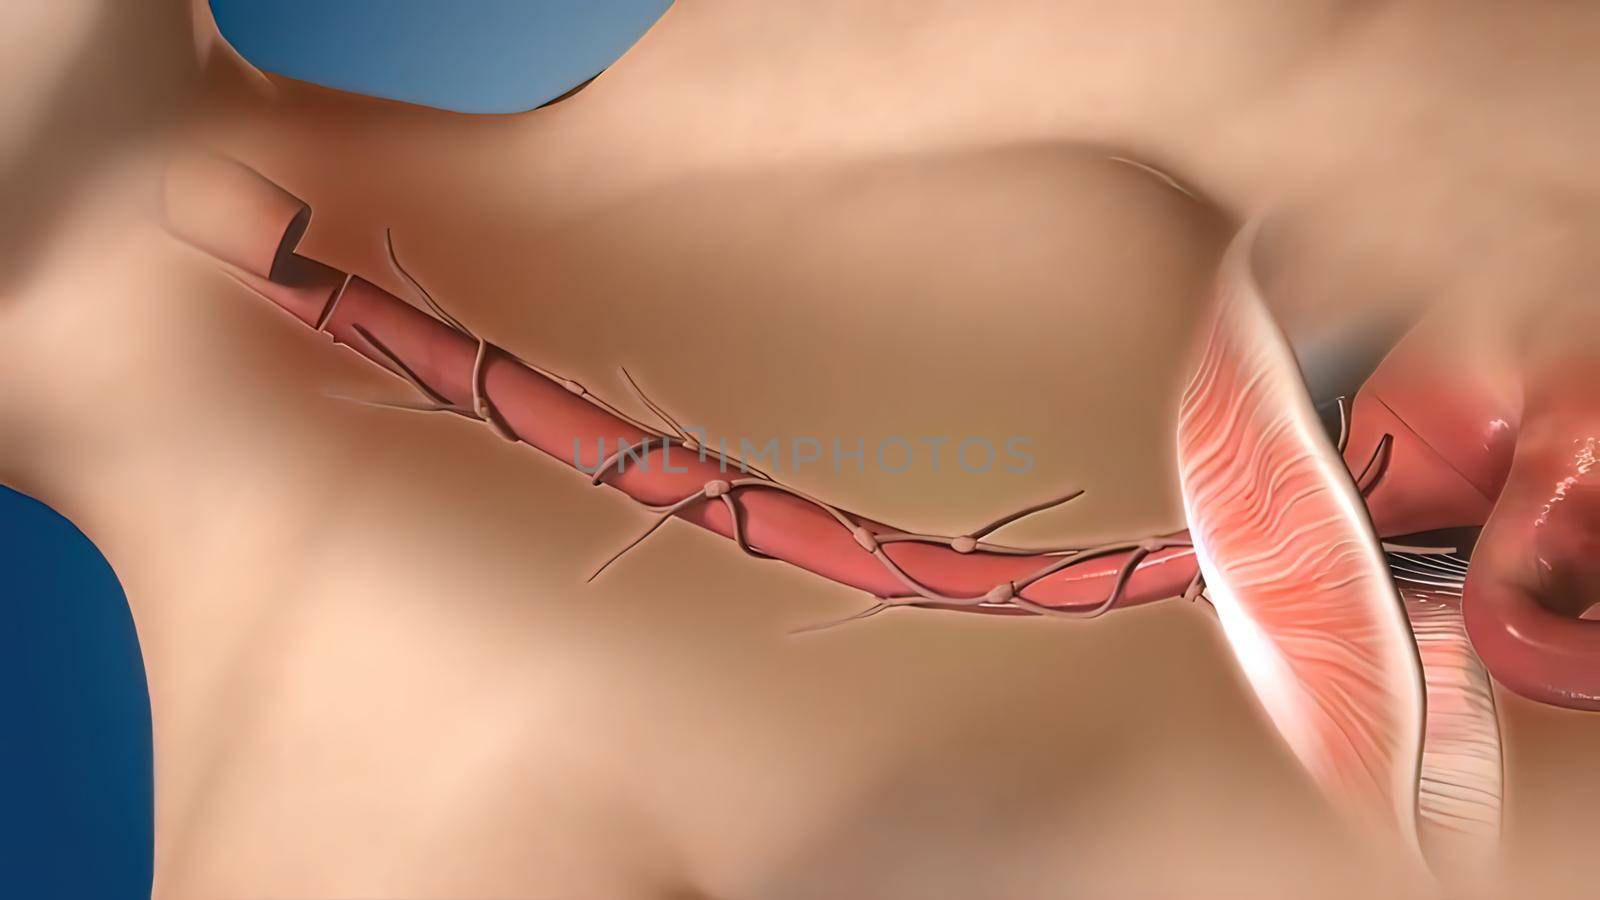 Medical of esophagus On Realistic Human Model by creativepic